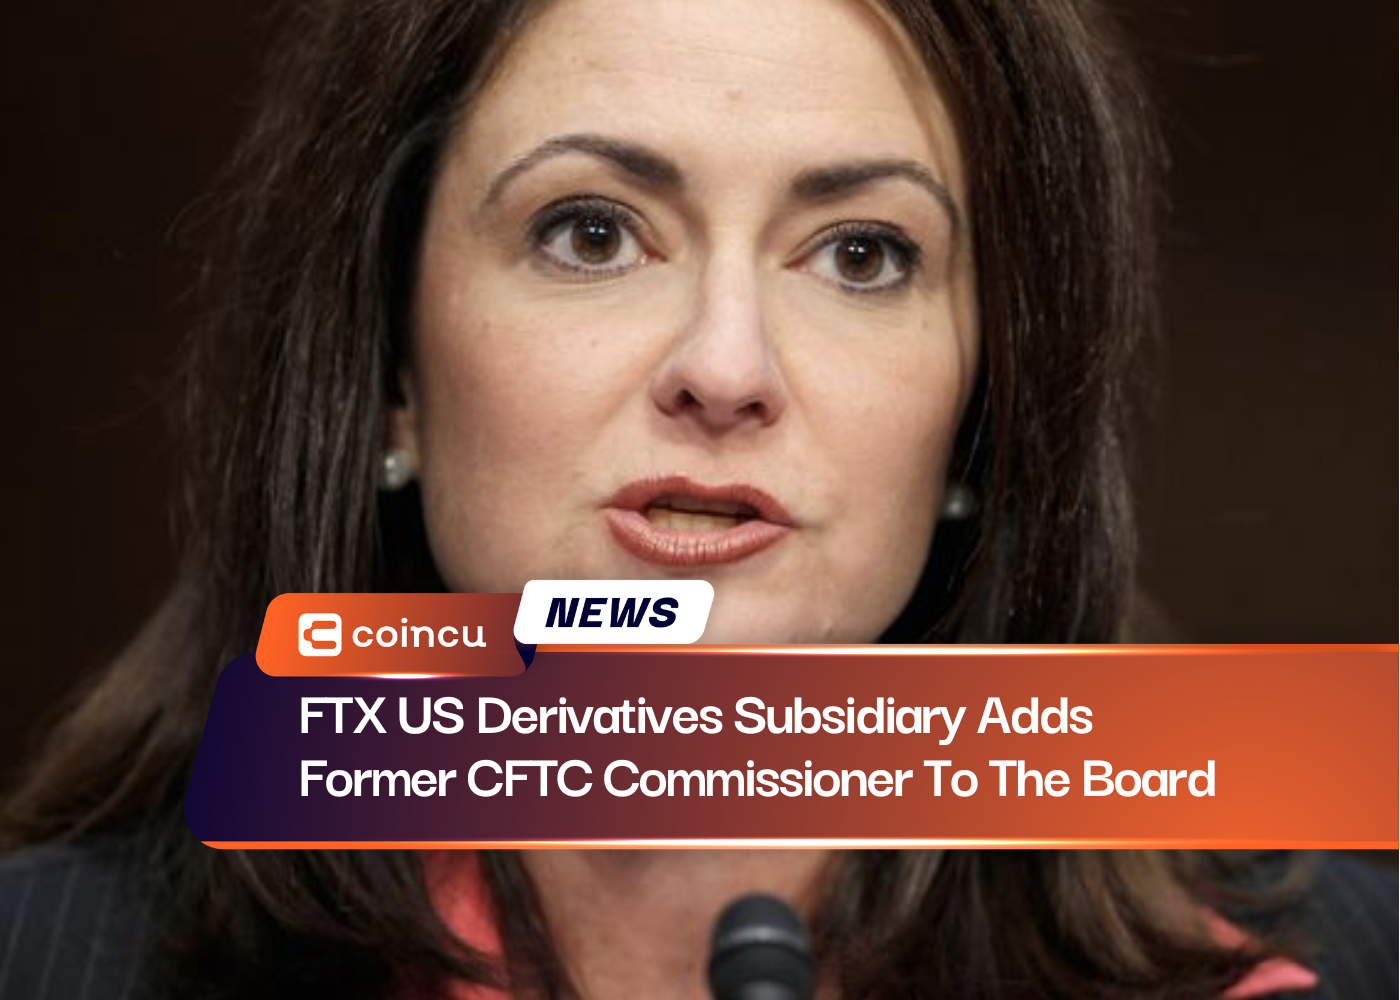 FTX US Derivatives Subsidiary Adds Former CFTC Commissioner To The Board